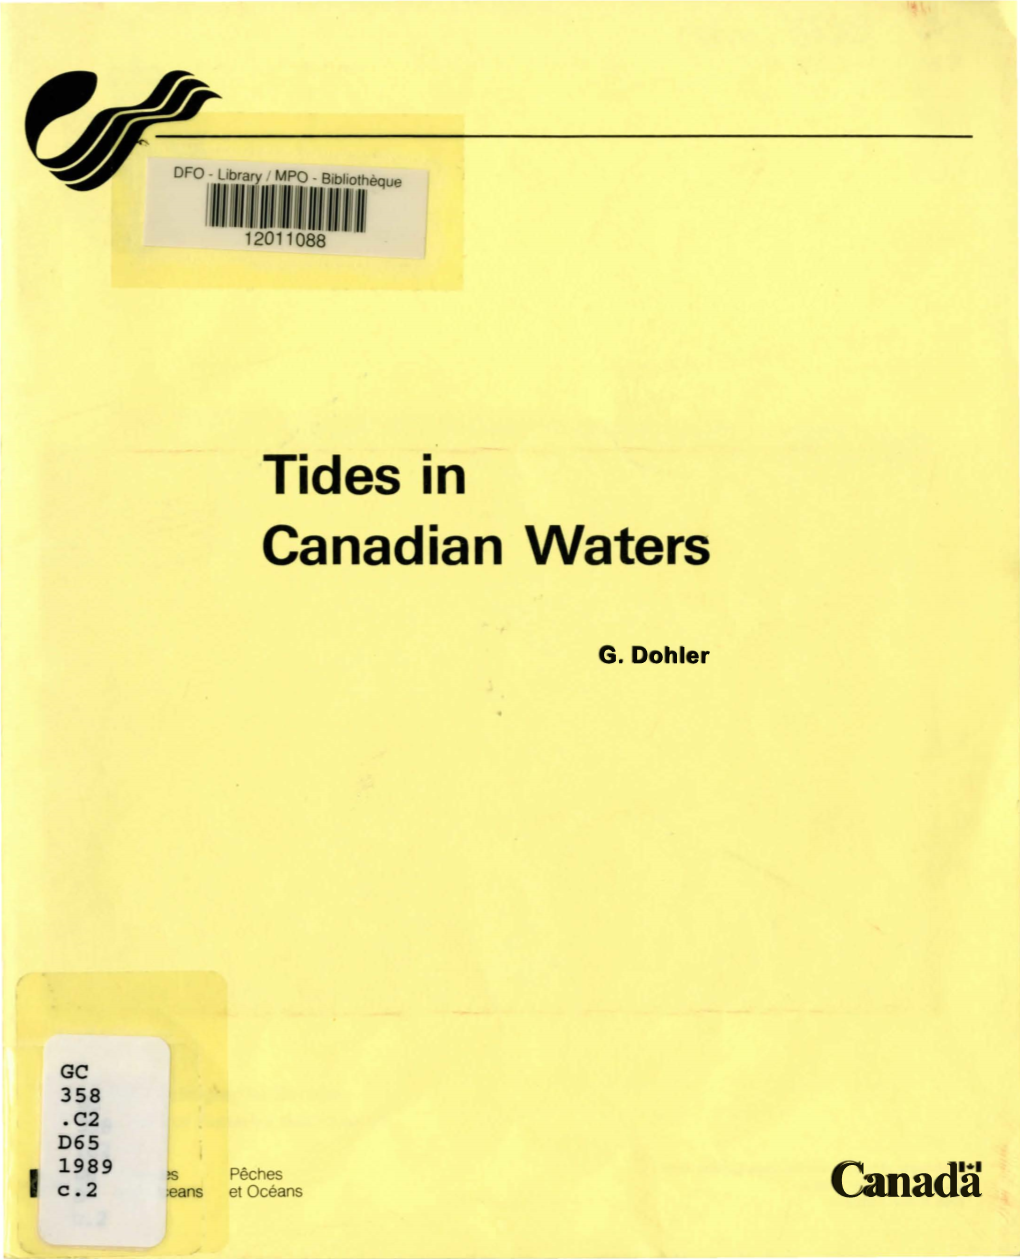 Tides in Canadian Waters